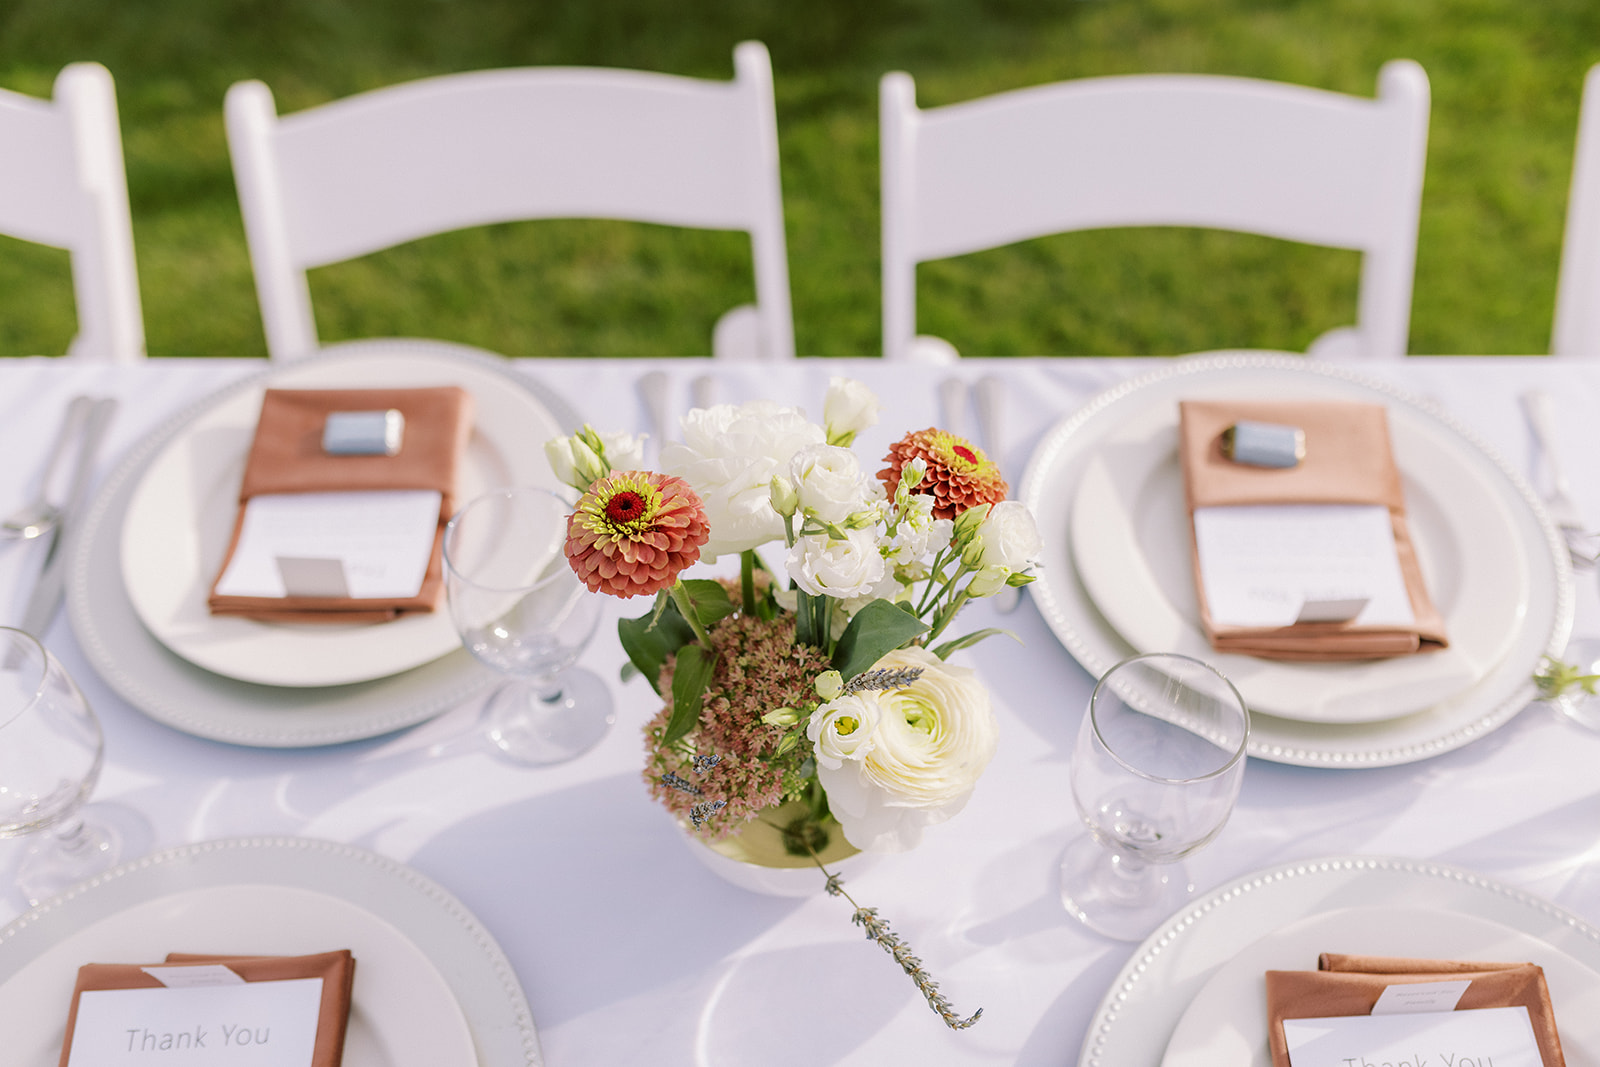 Clean white linens and and plates with summer floral arrangements down the center of the long reception tables.